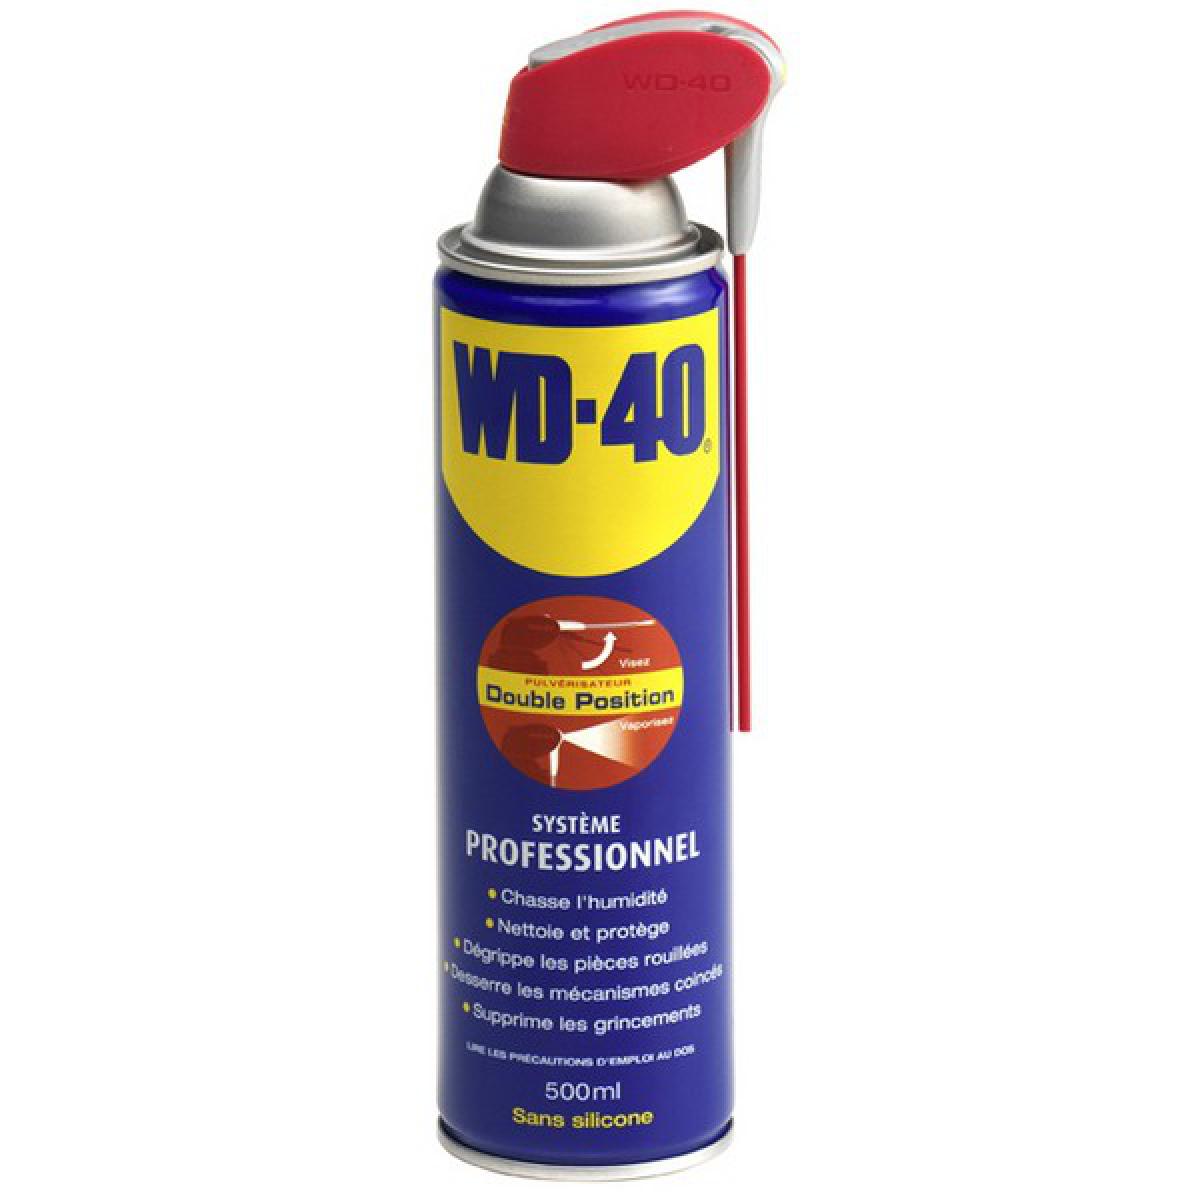 Wd-40 - Huile multifonction Smart Straw aérosol 500ml WD-40 1 PCS - Mastic, silicone, joint